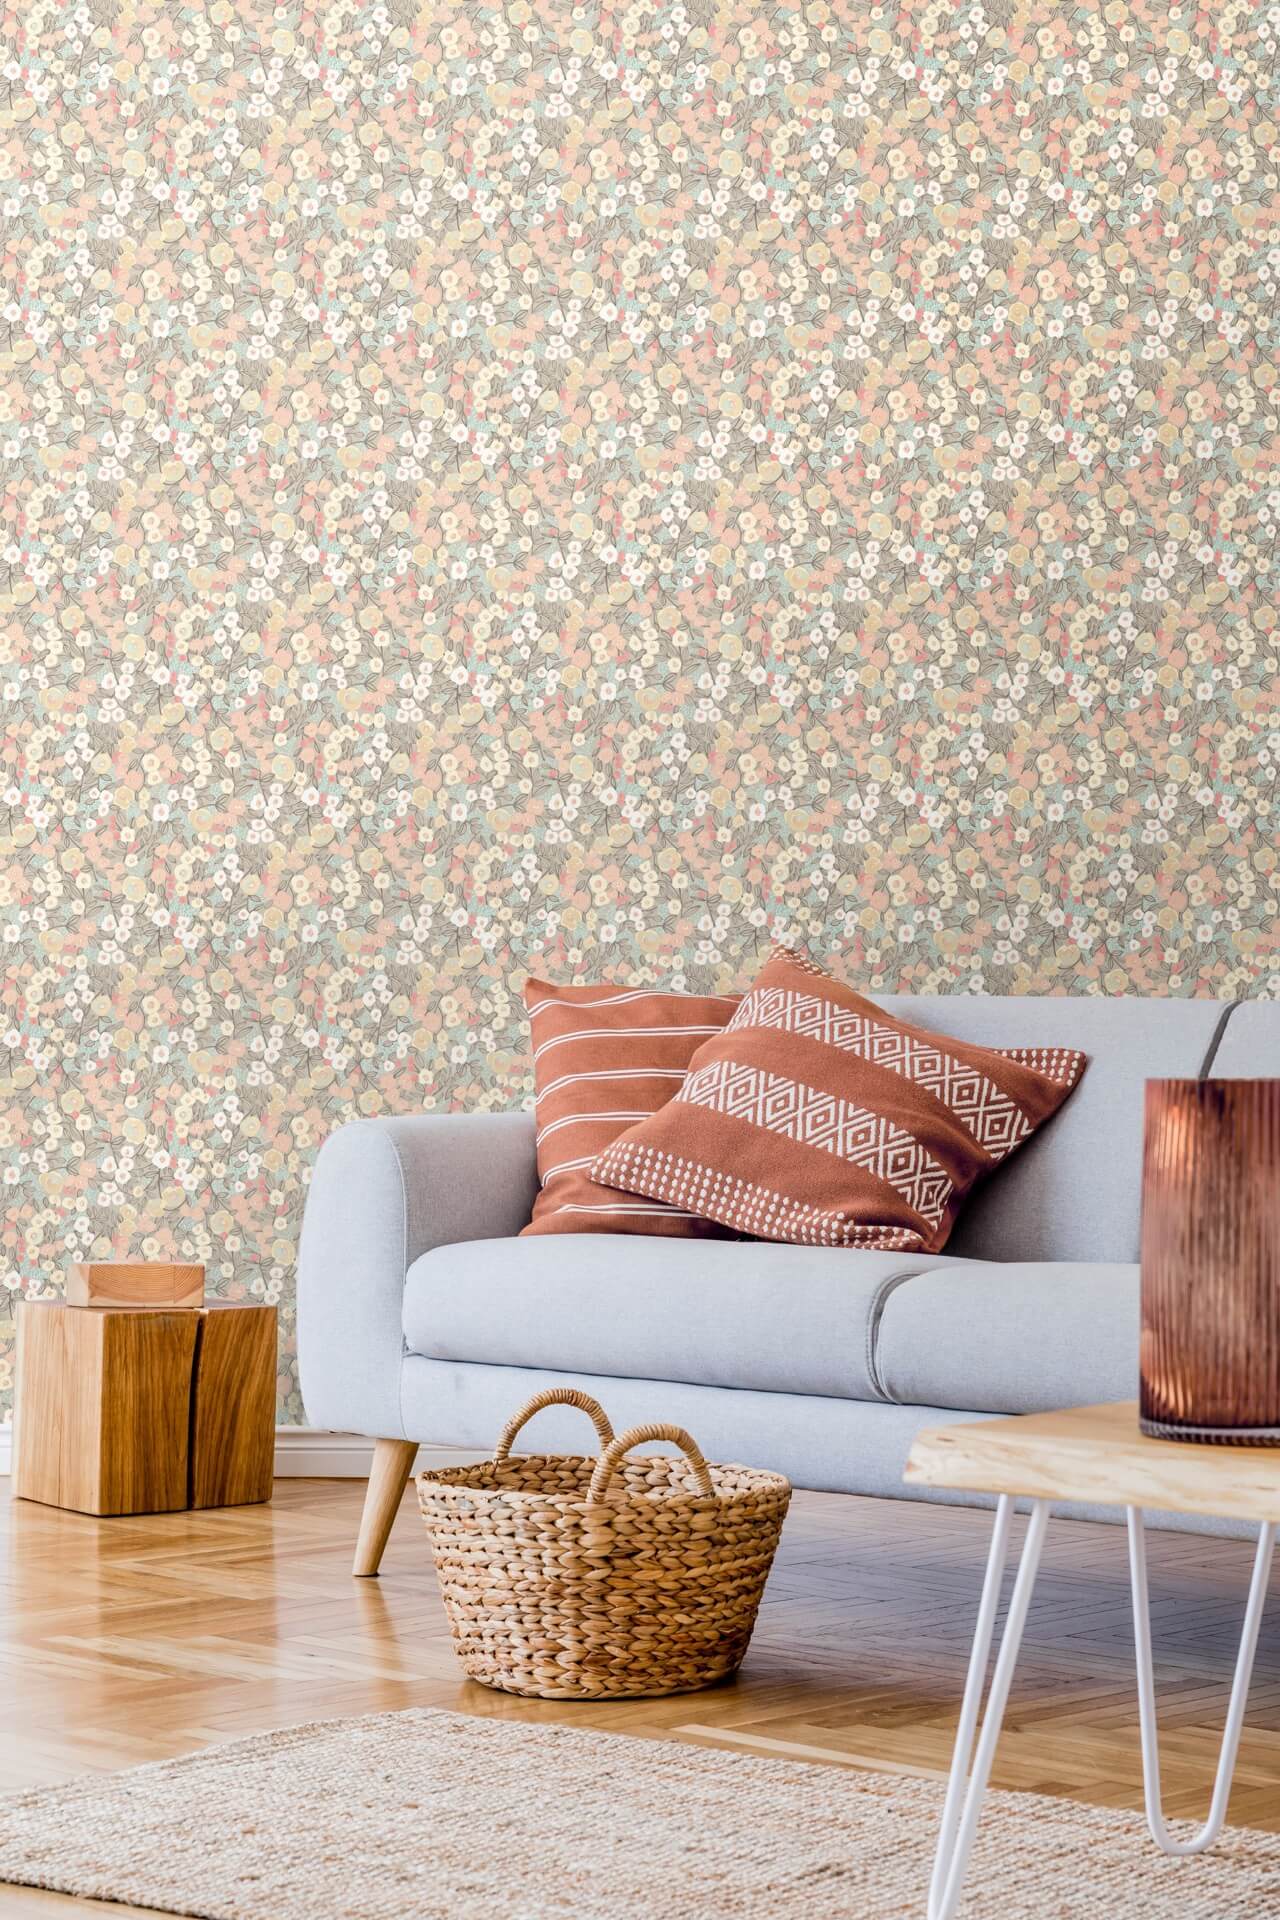 15 of the best independent wallpaper brands